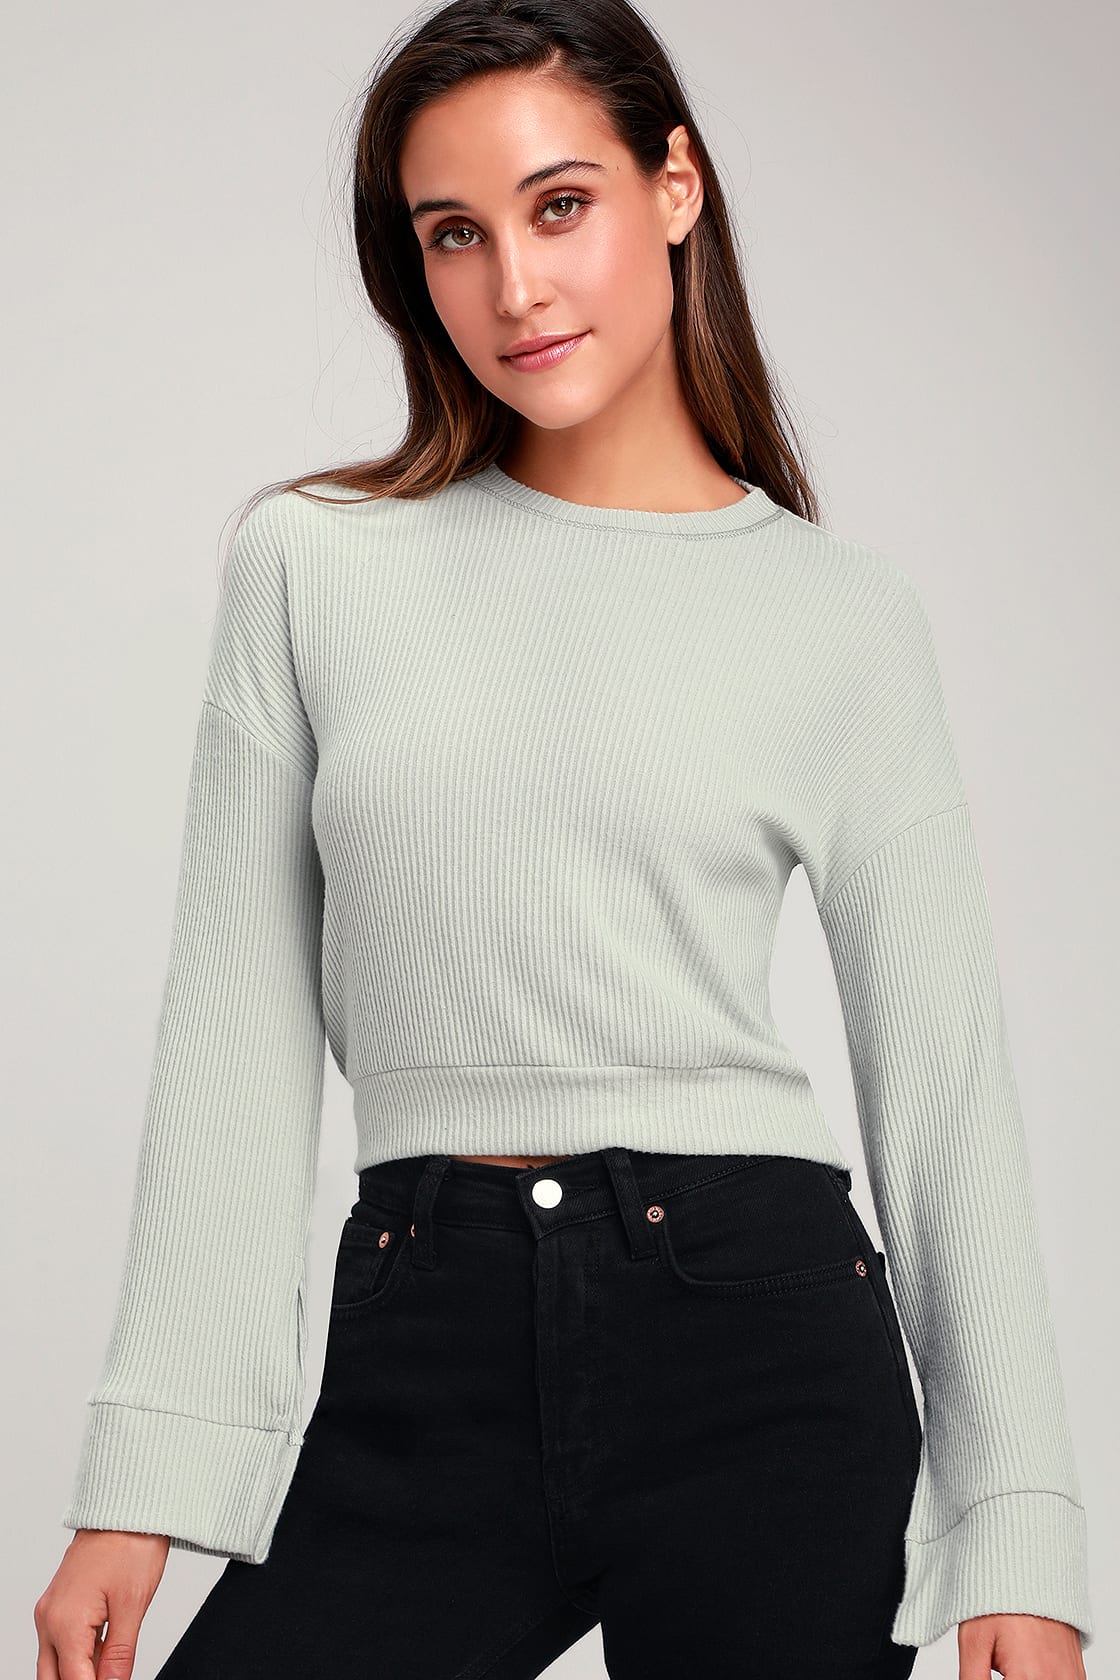 Project Social T - Washed Sage Green Top - Ribbed Sweater Top - Lulus